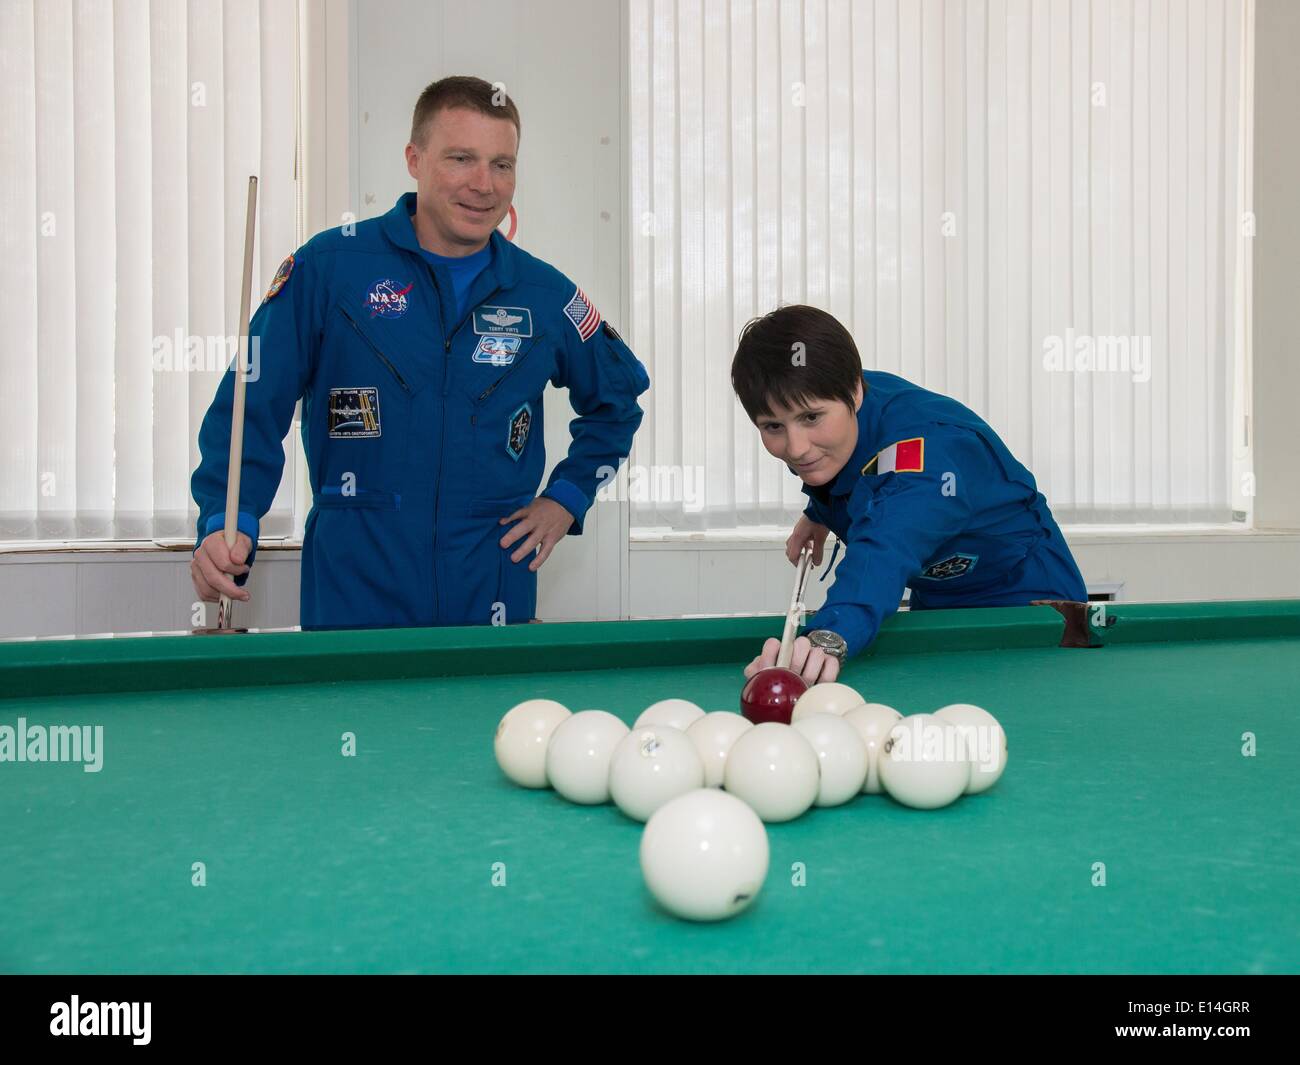 ISS Expedition 41 backup crewmembers Terry Virts of NASA, left, and Samantha Cristoforetti of the European Space Agency try their hand at a game of billiards at the Cosmonaut Hotel May 21, 2014 in Baikonur, Kazakhstan. Expedition 41 will launch on May 29 in the Soyuz TMA-13M spacecraft from Baikonur for a 5 ½ month mission on the International Space Station. Stock Photo